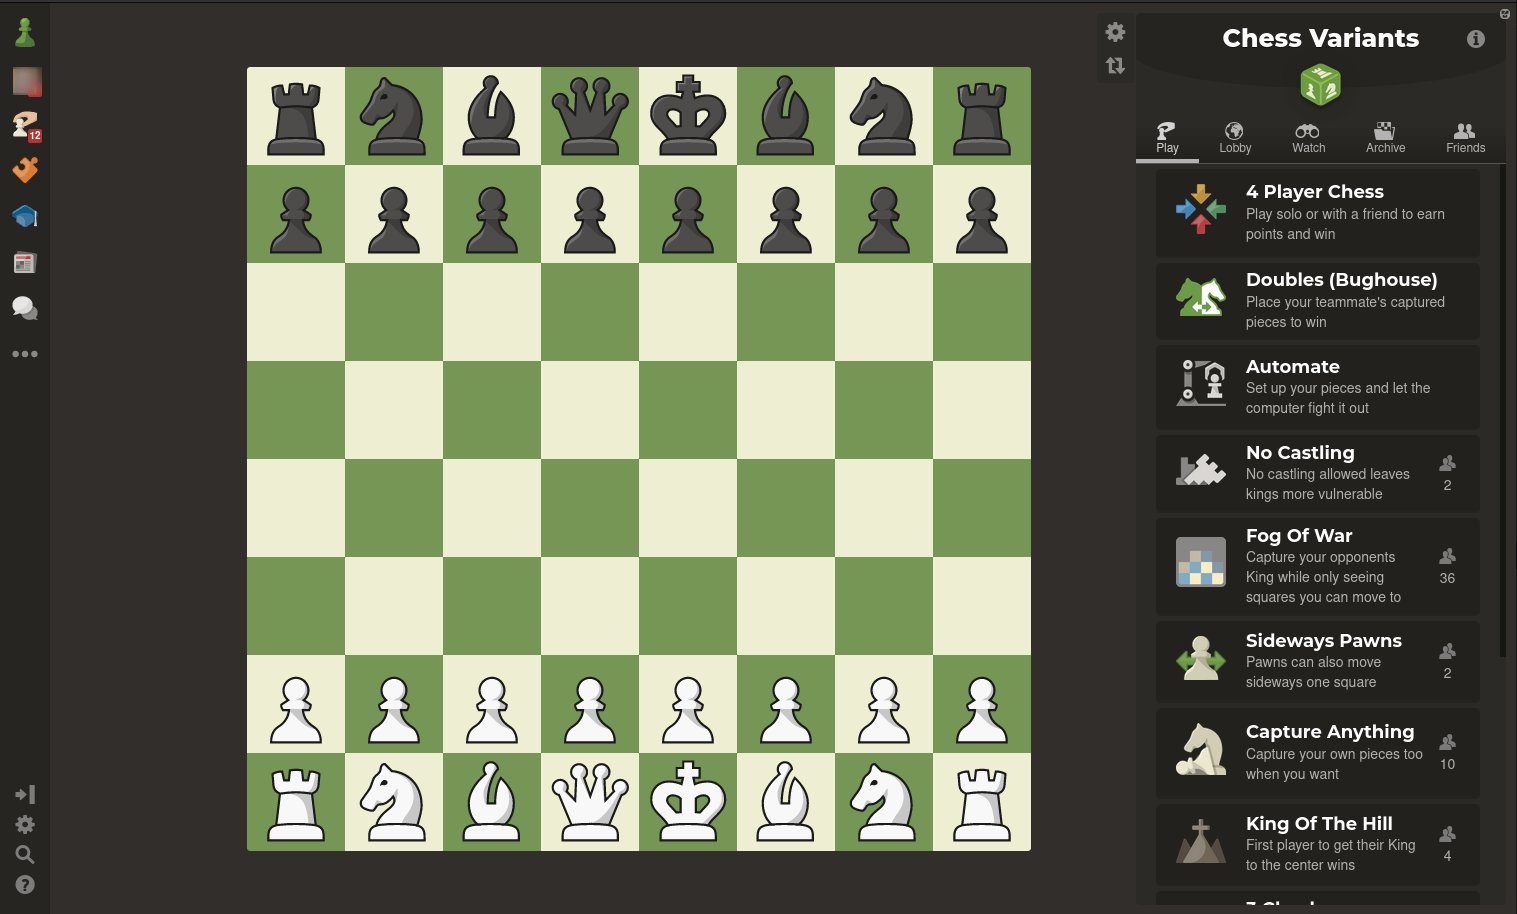 Four-Way Chess – Green Chess